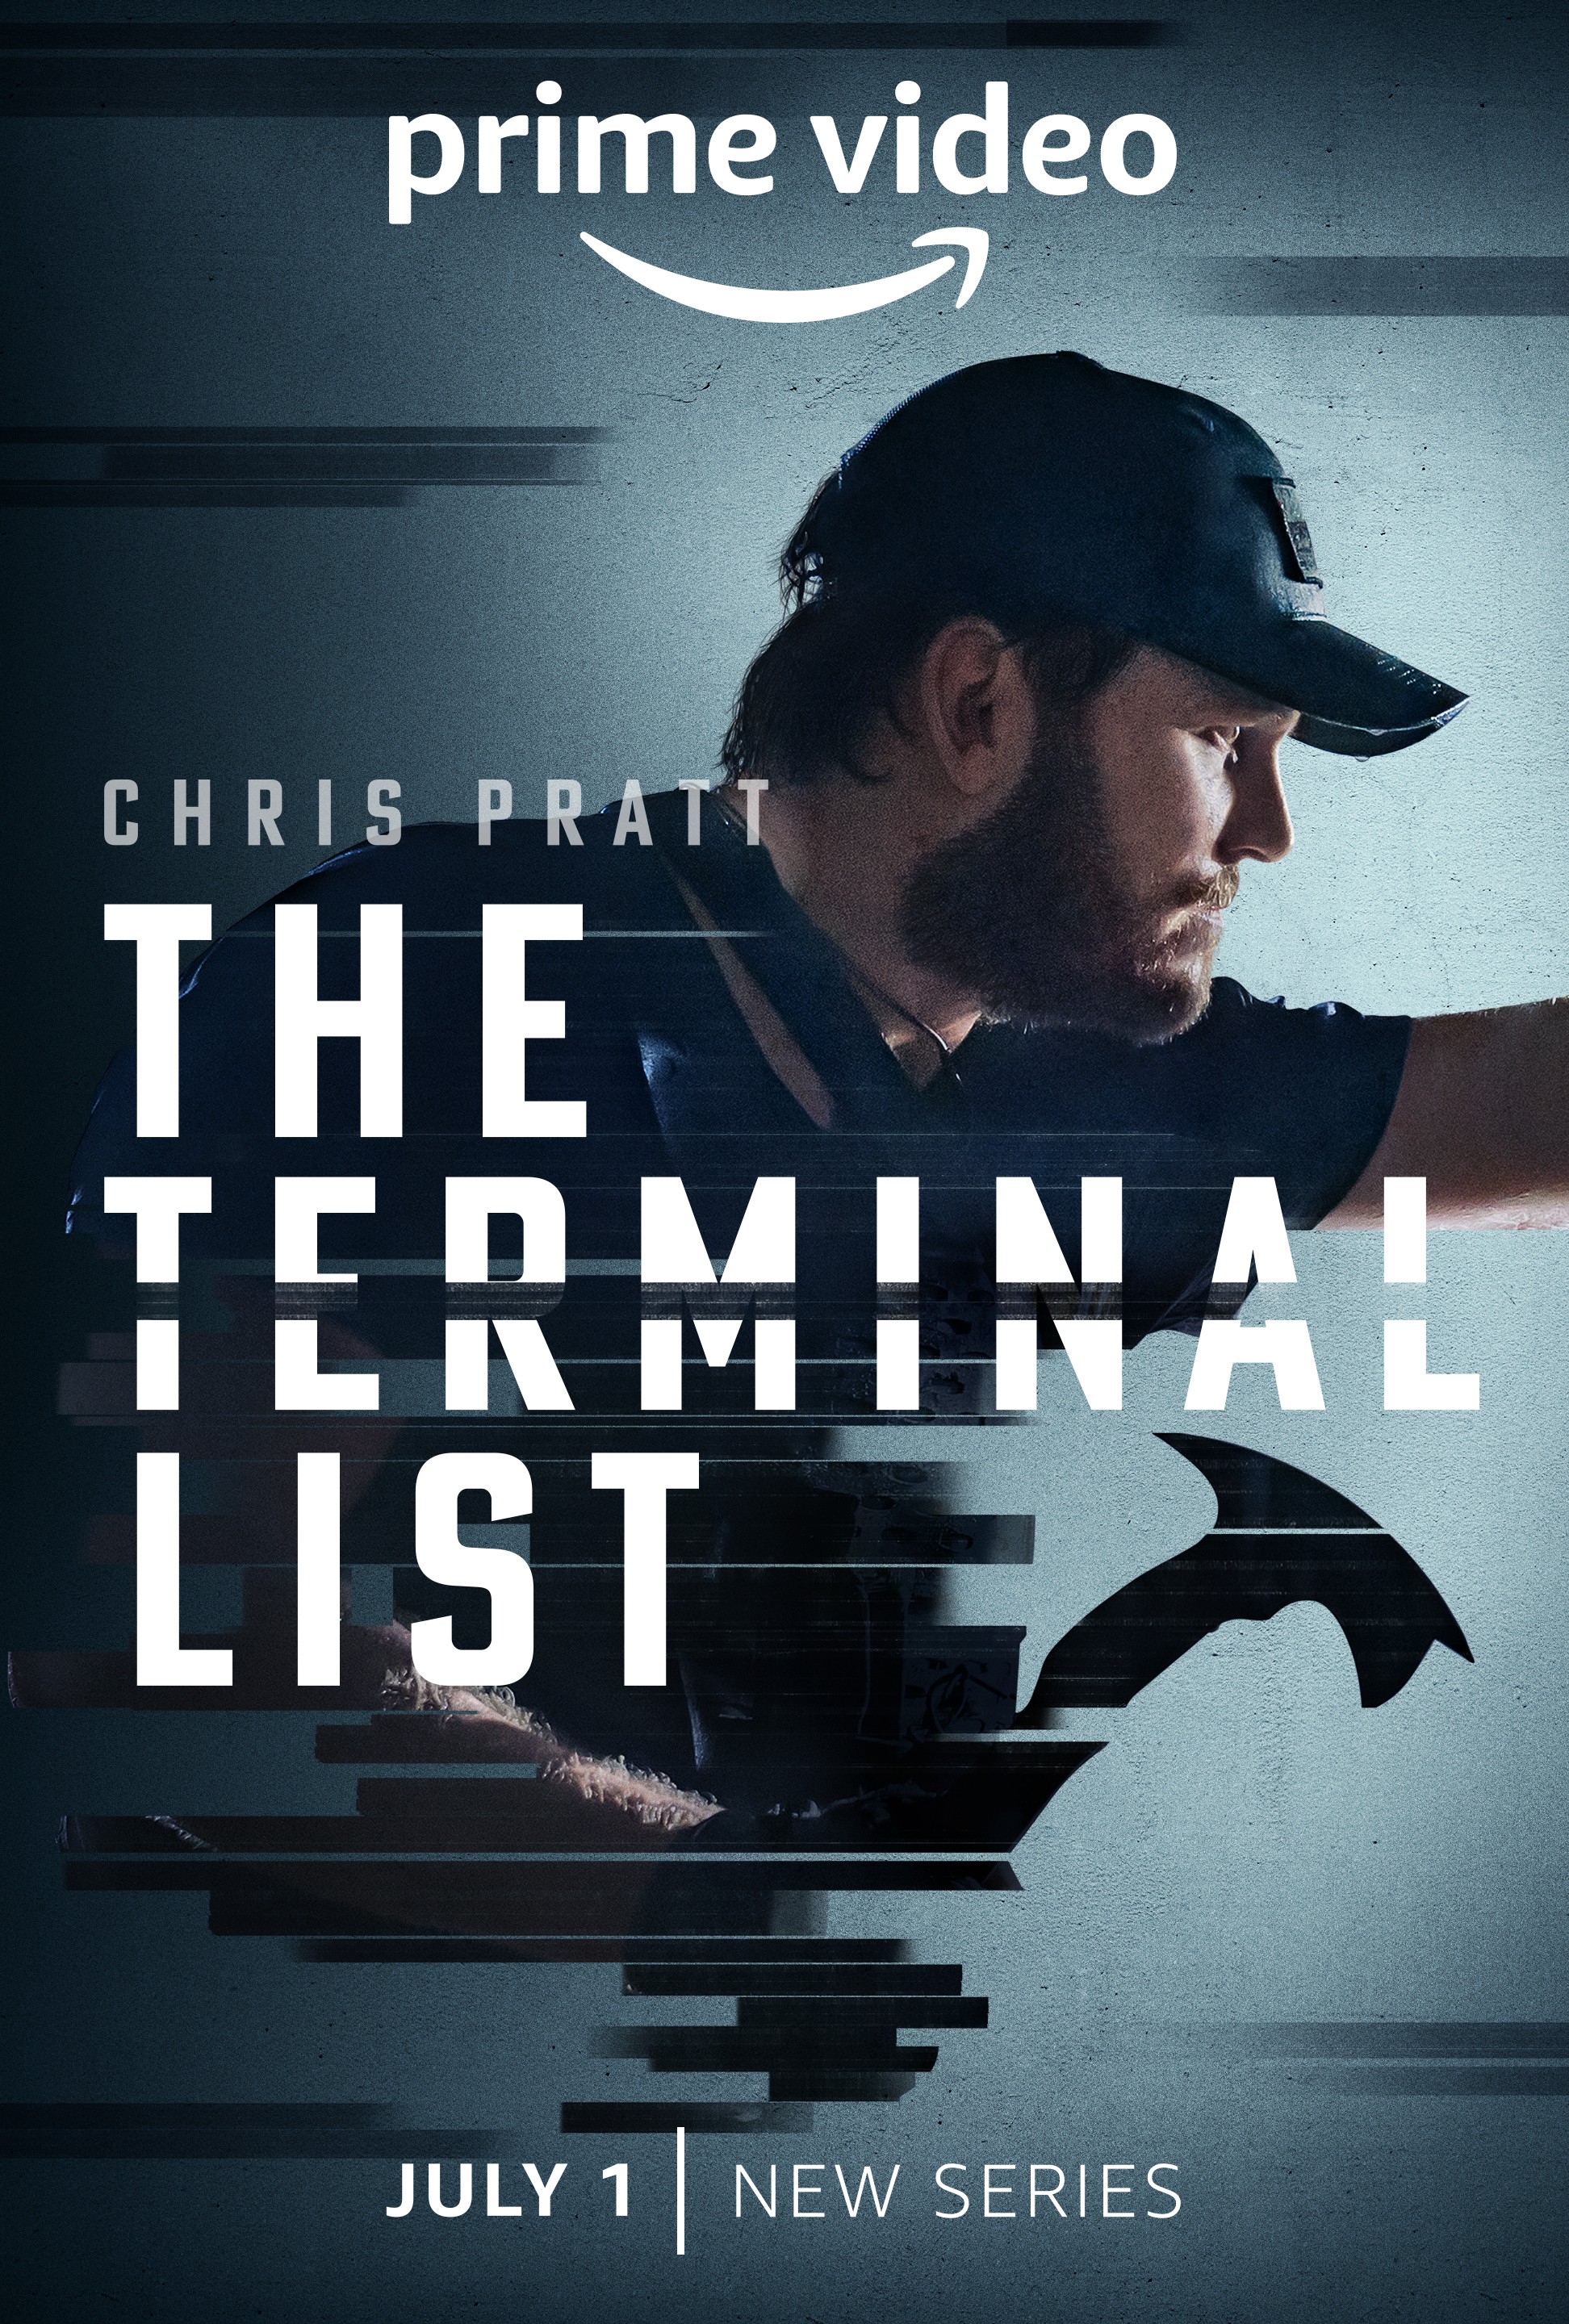 the terminal list movie review